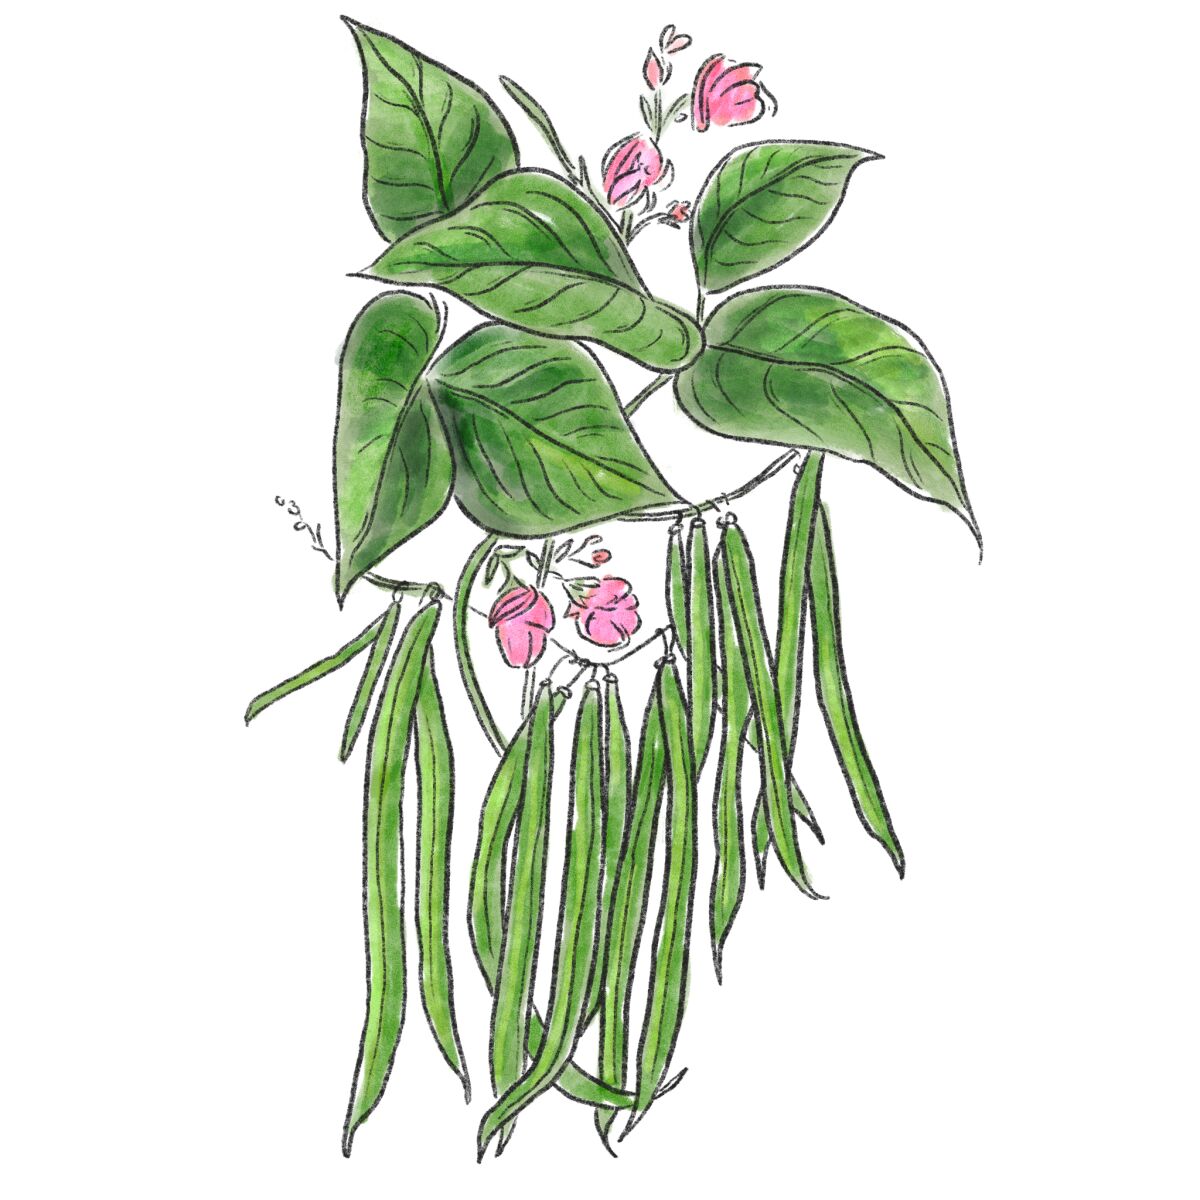 An illustration of green beans growing on plants with leaves and flowers 